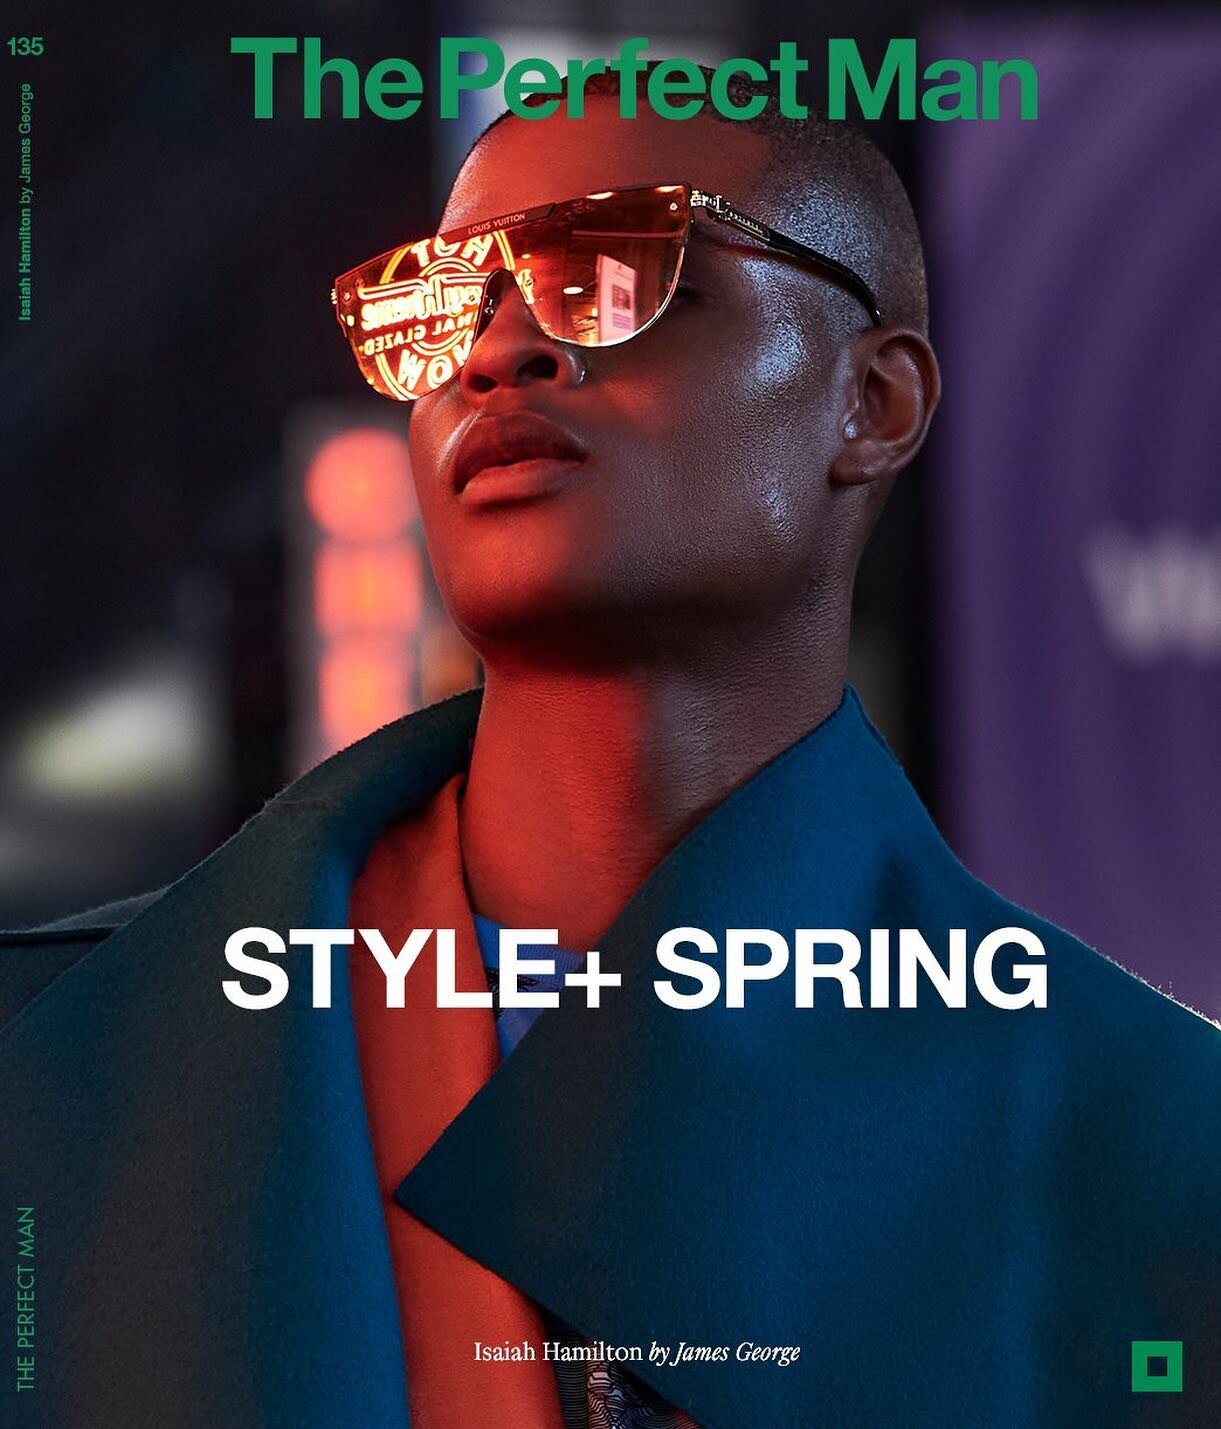 Living For The City: Spring is about making big moves in bold colors and prints. Model Isaiah Hamilton shows us how.
&mdash;
To view complete story in Edition 135 tap link in bio.
&mdash;
Photos @jameswgeorge 
Style @mikestallingsny 
Model @isaiahkha